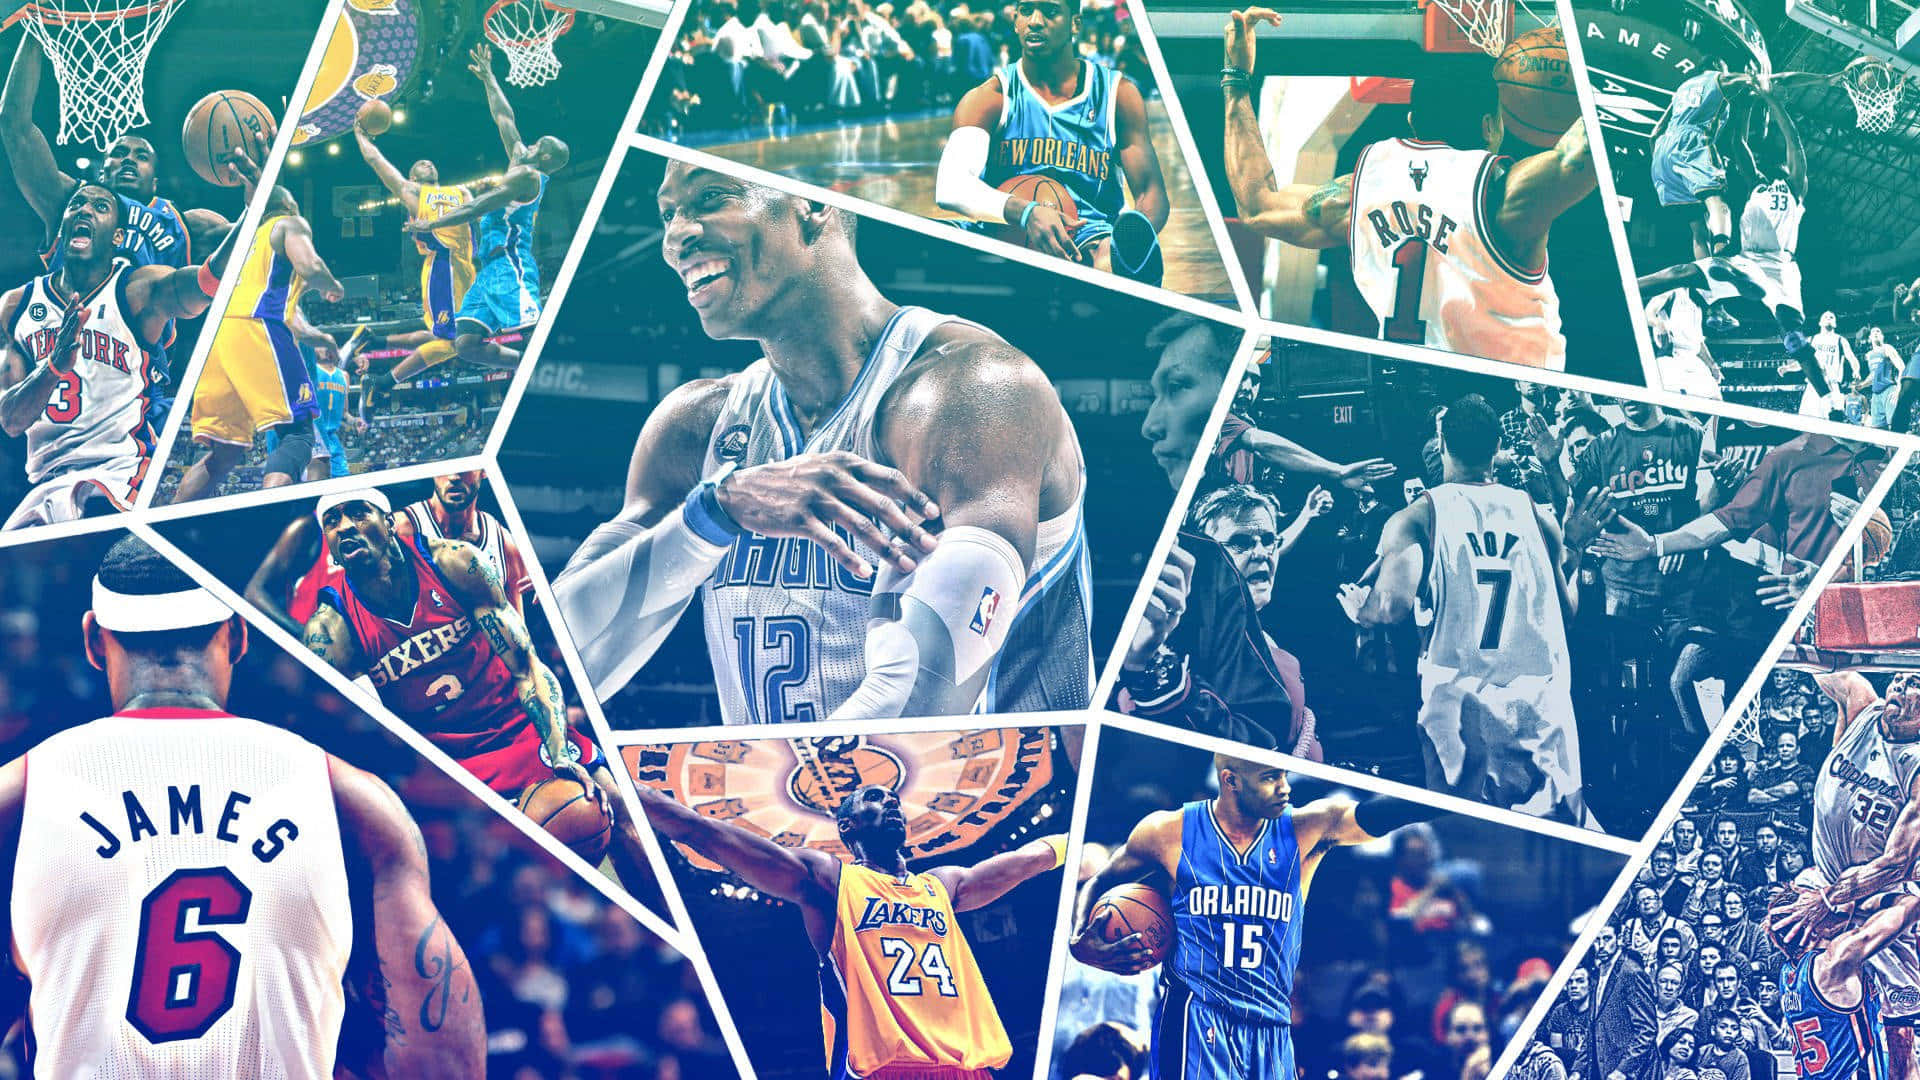 Free Aesthetic Nba Wallpaper Downloads, [100+] Aesthetic Nba Wallpapers for  FREE 